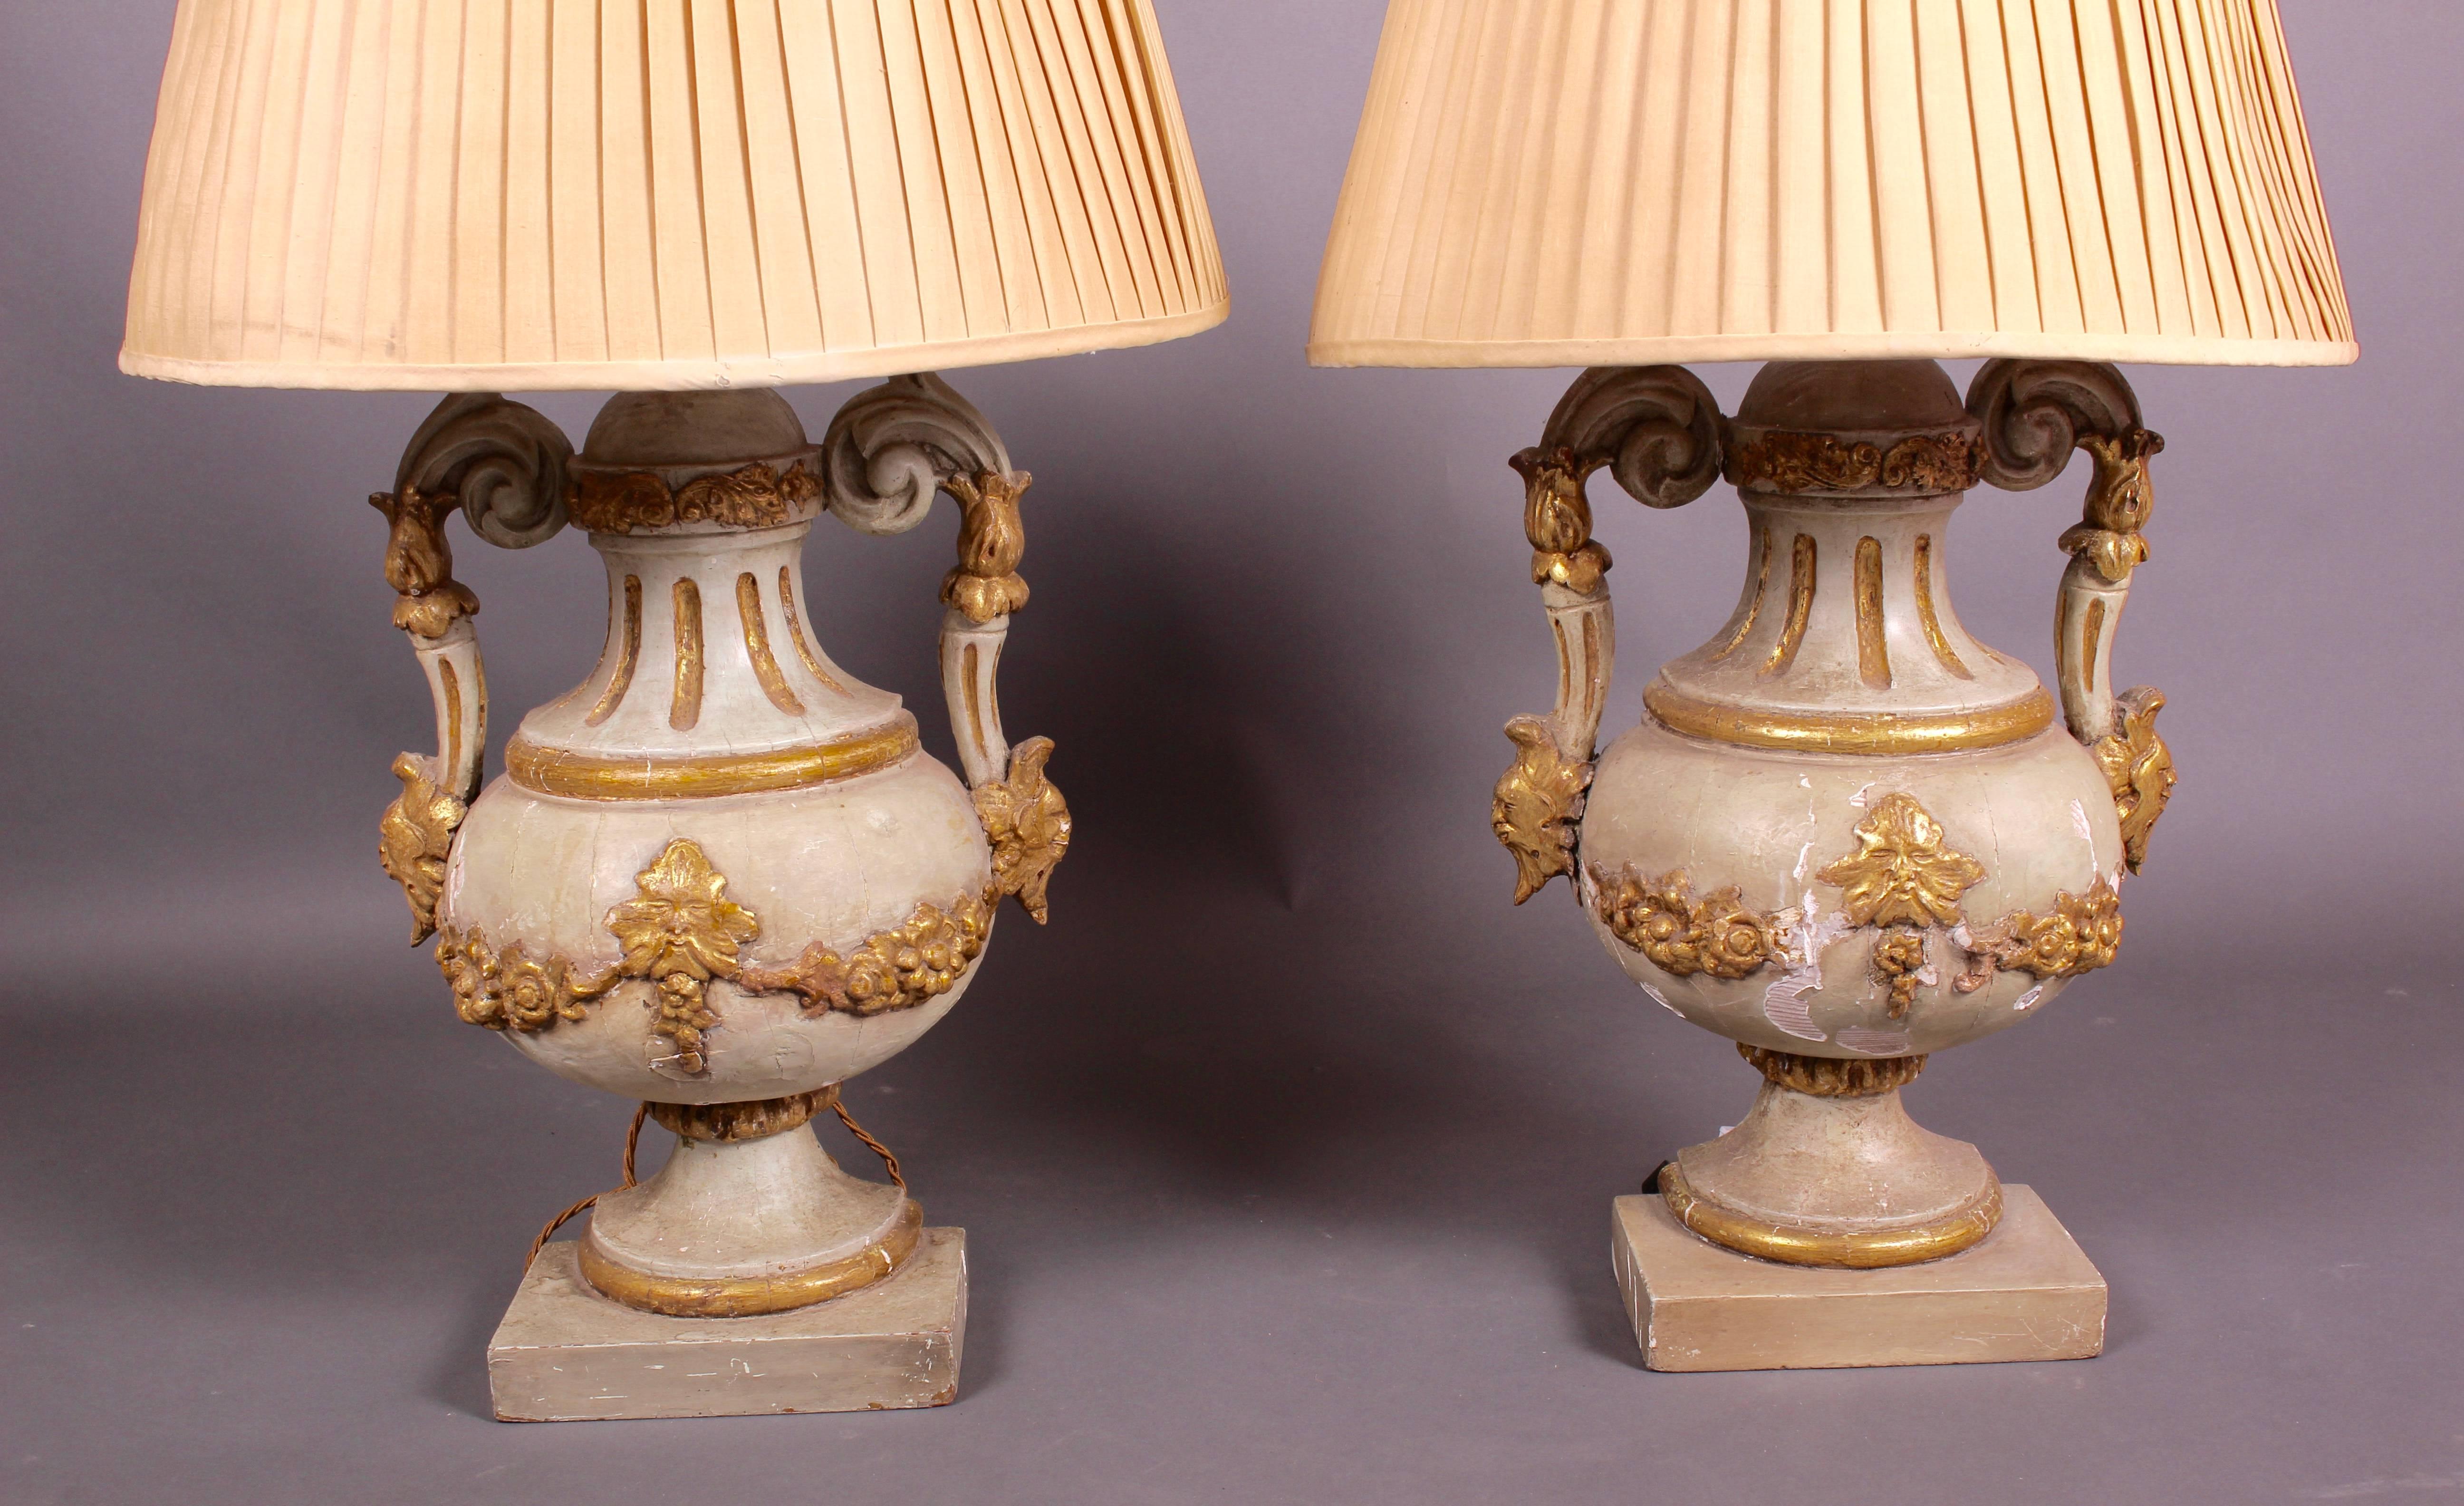 A large and imposing pair of Venetian urn lamps with pleated silk crescent-shaped shades. The urns with gadrooned neck and bulbous body, with gilded floral and mask decoration, probably that of Bacchus the Greek god of wine. Flanked by large